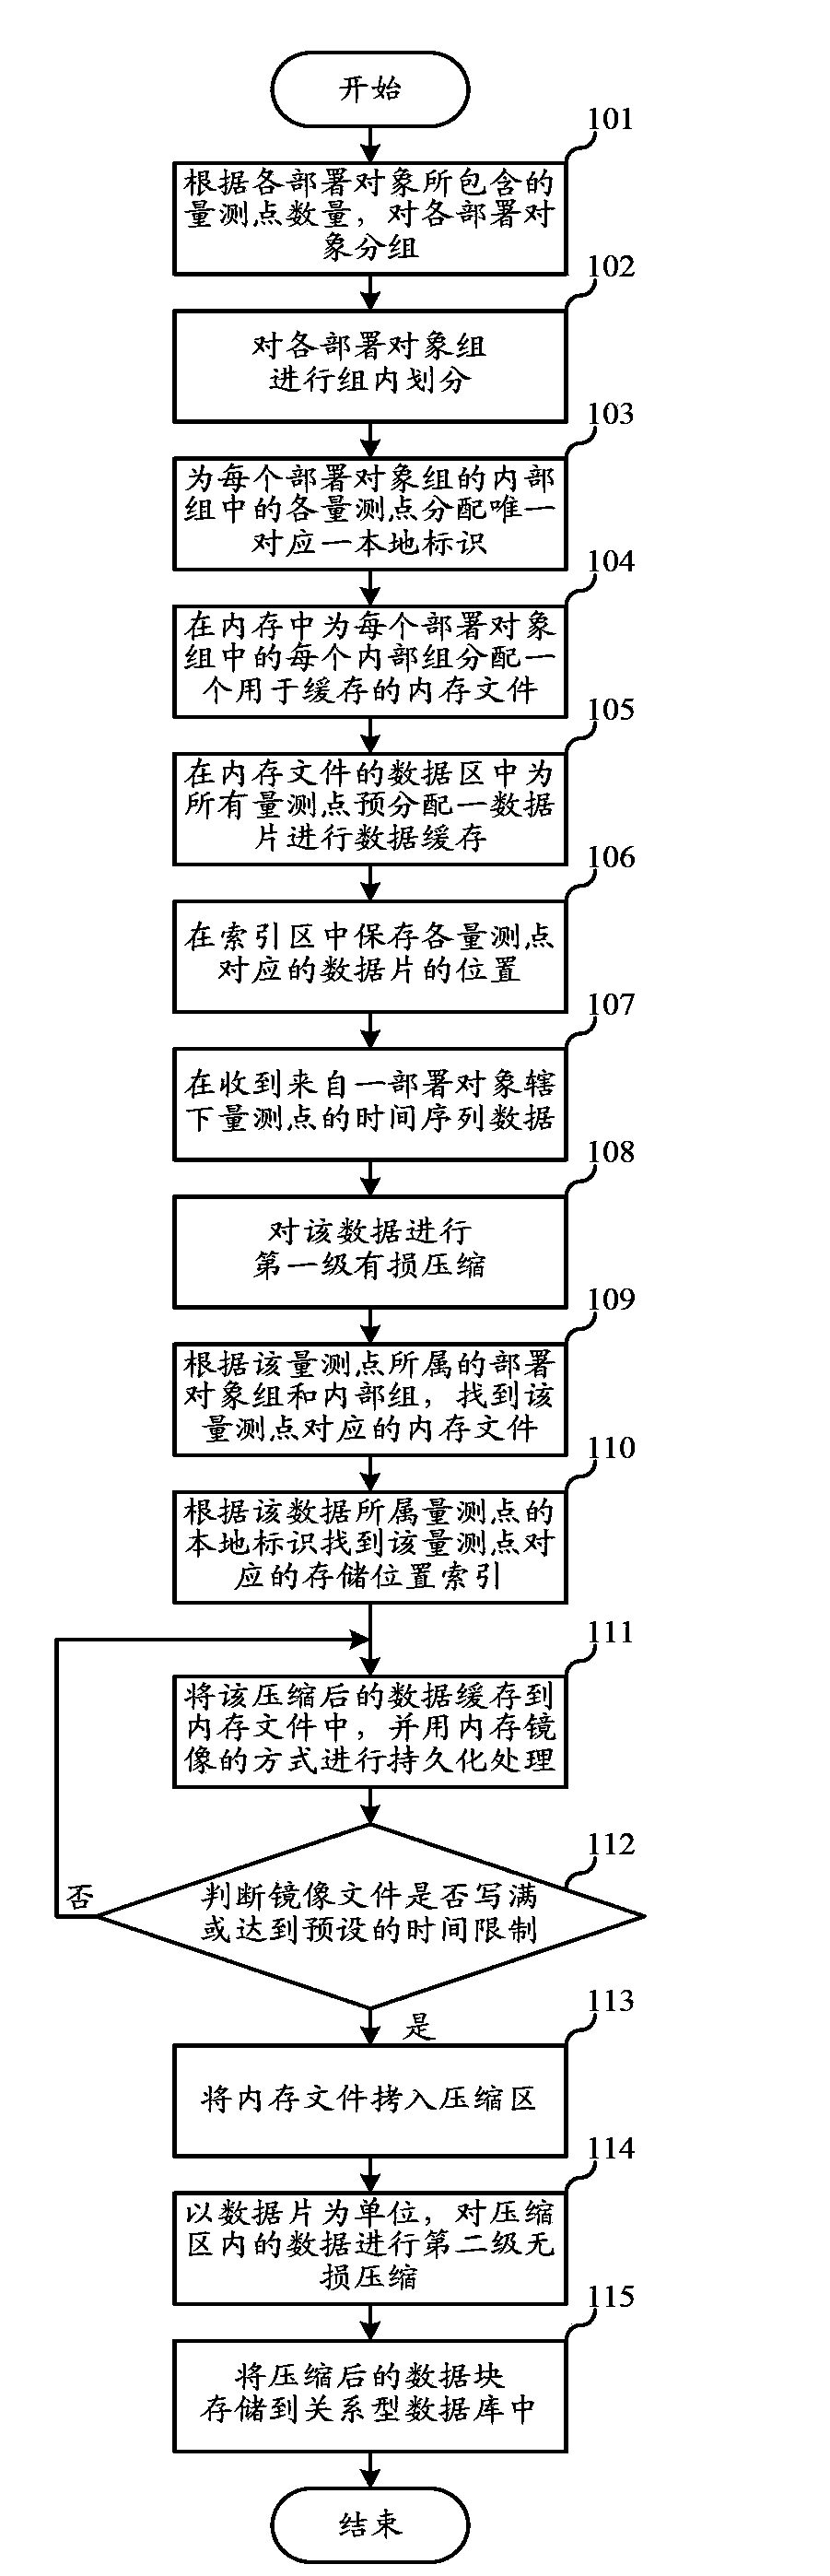 Multisource time series data compression storage method